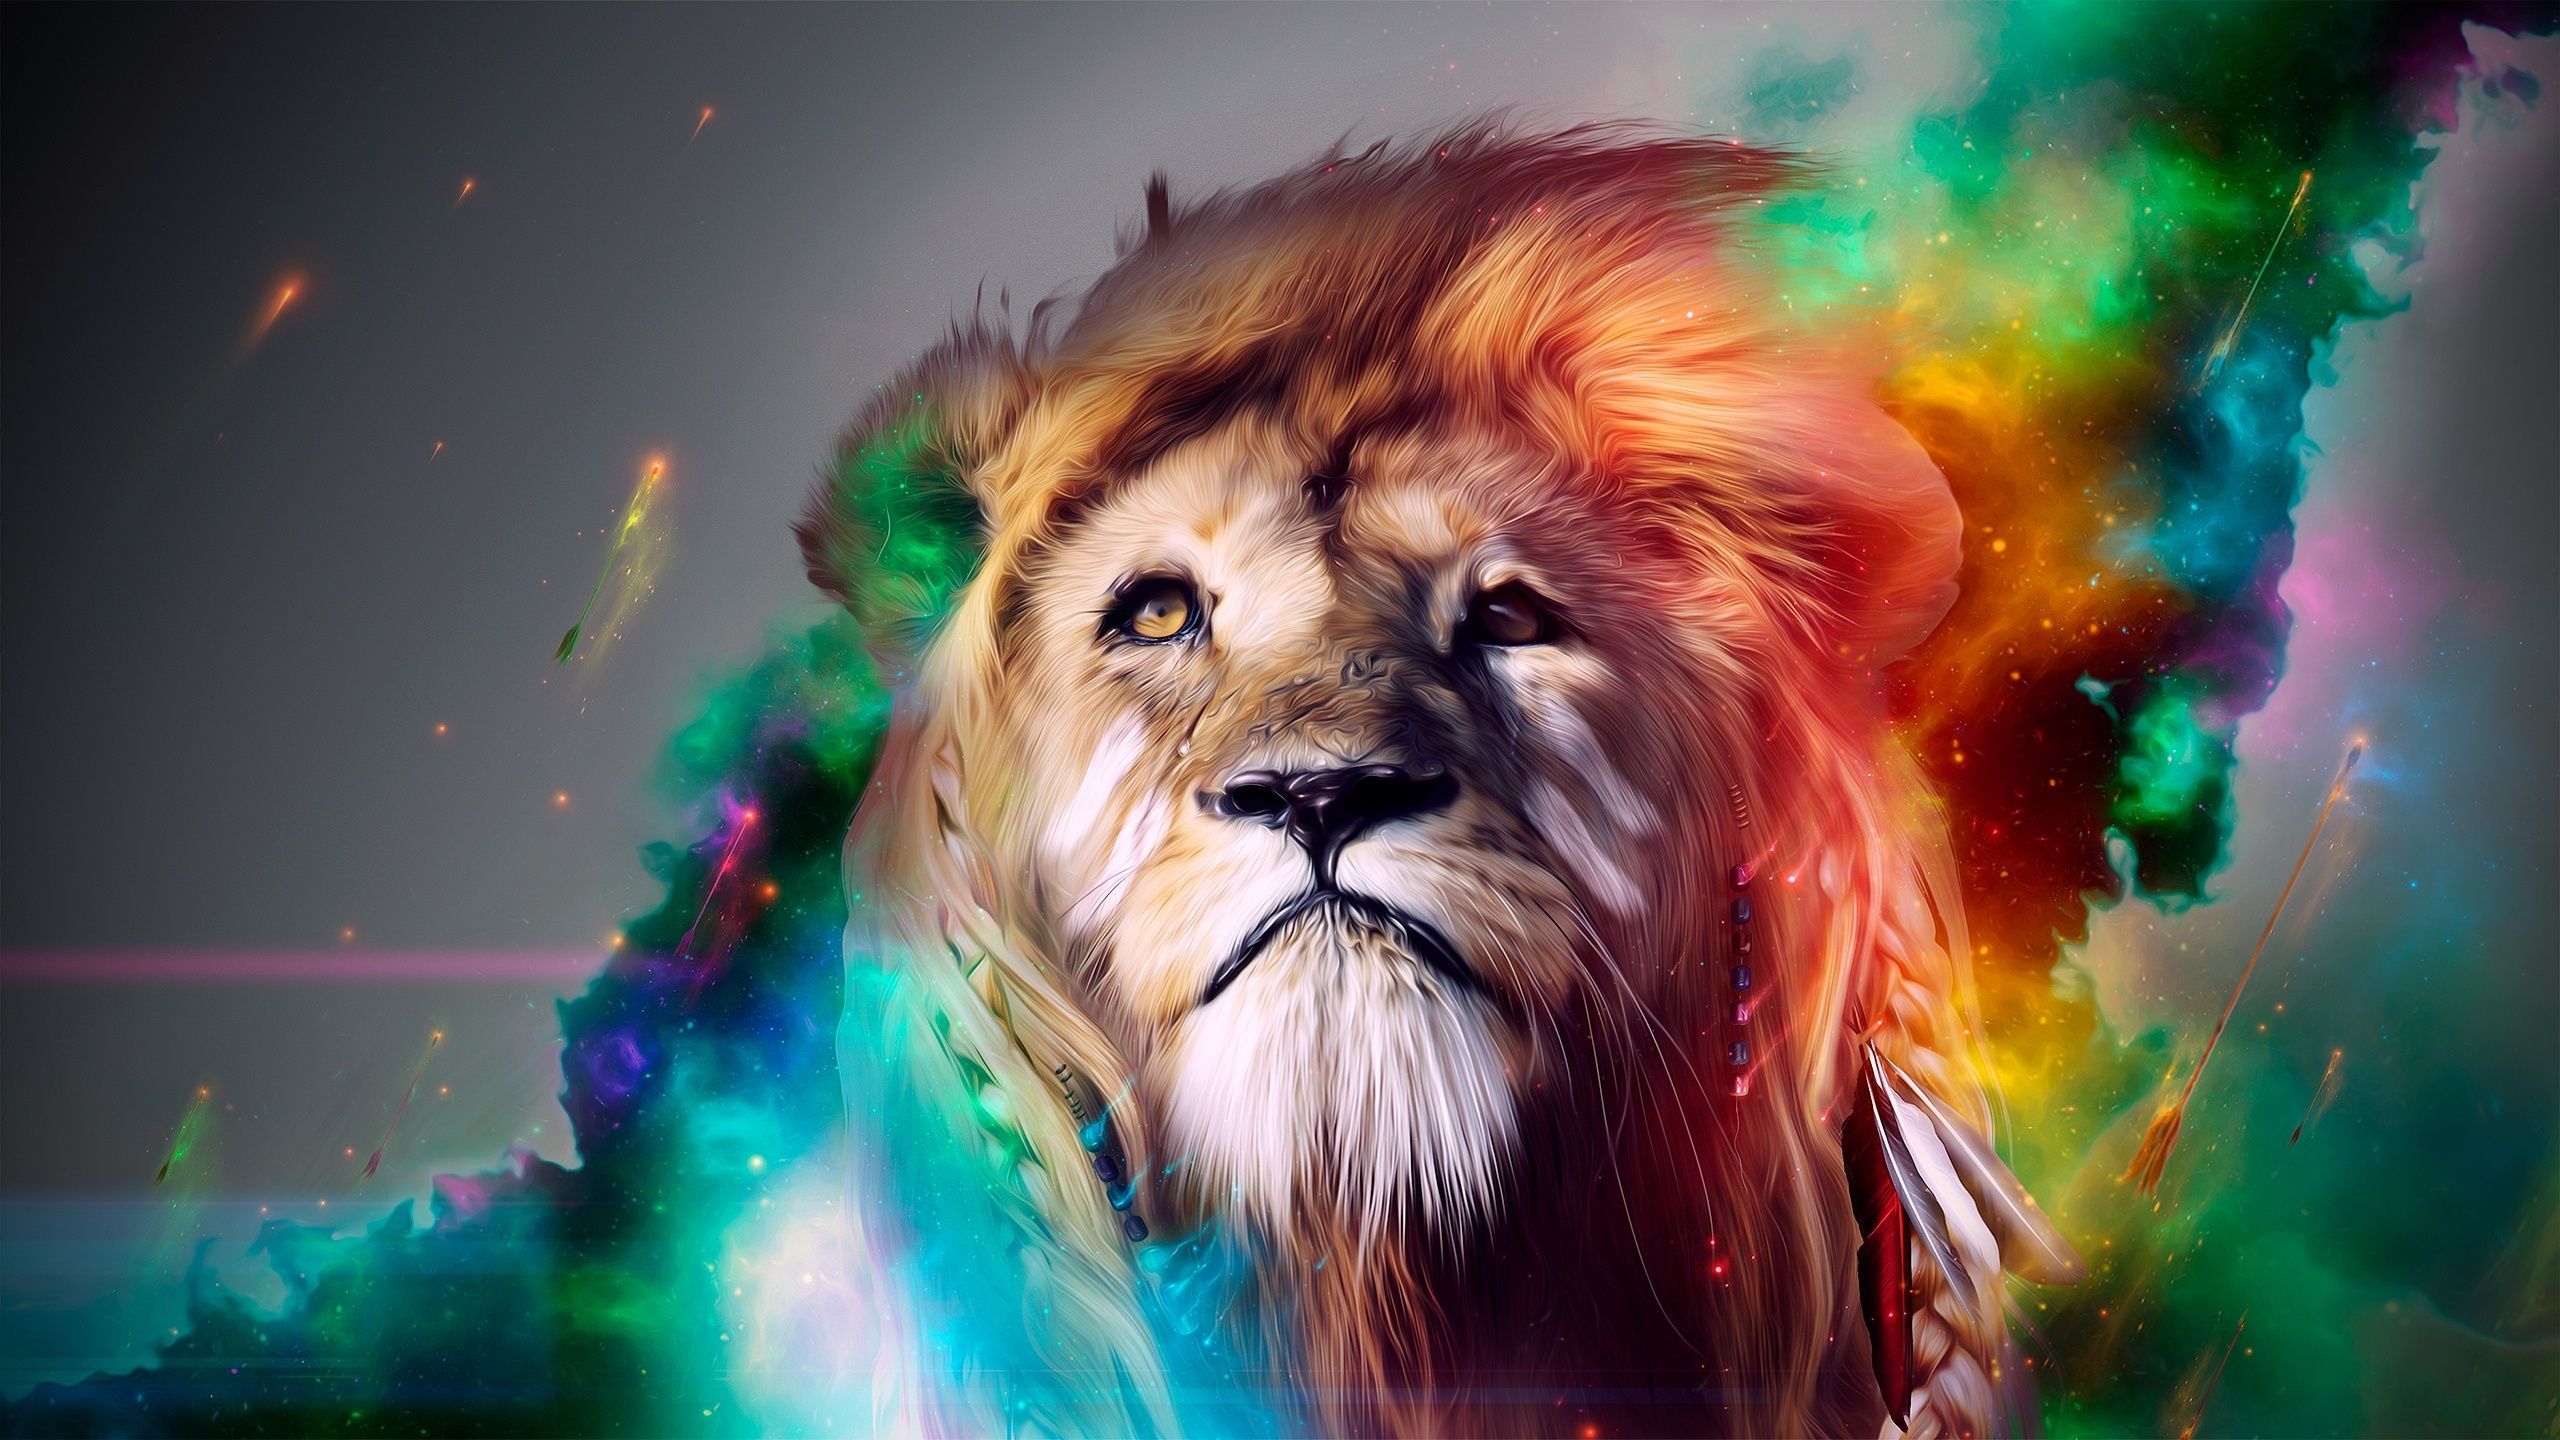 Lion Abstract Wallpapers | HD Wallpapers